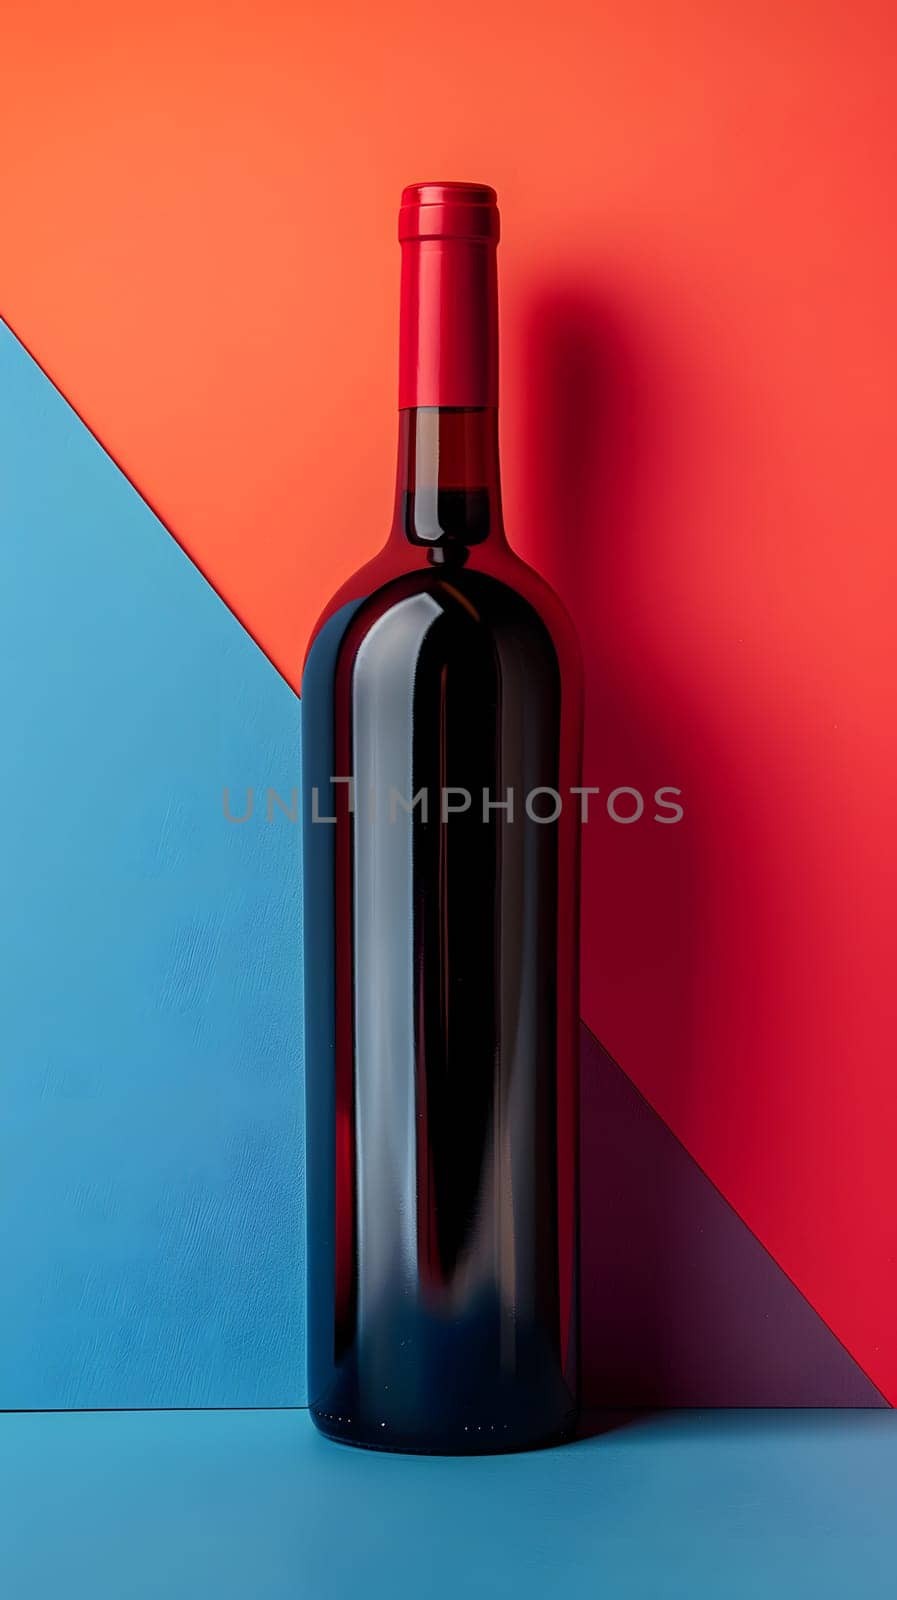 A glass bottle of red wine is elegantly displayed on a vibrant blue and red background, showcasing the beauty of this alcoholic beverage in a unique setting